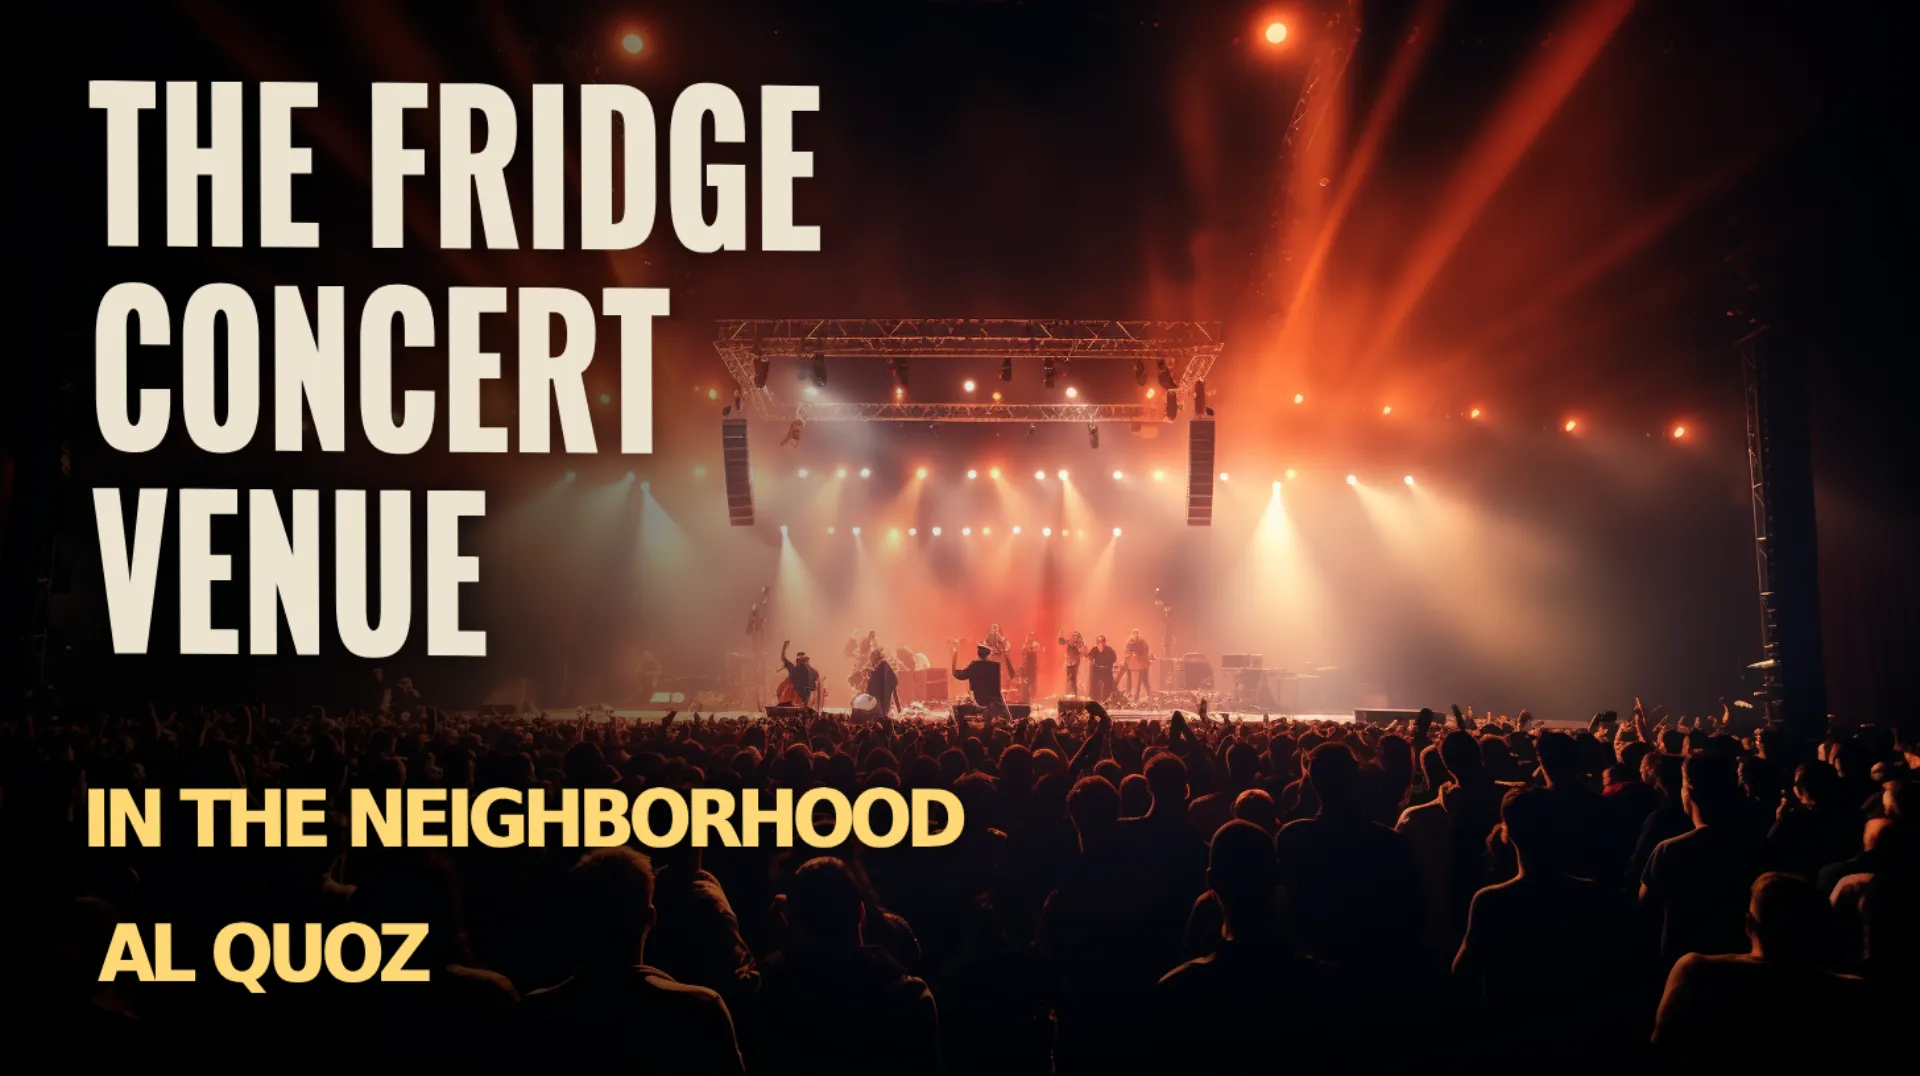 Fridge Concert Venue: A captivating image capturing the vibrant atmosphere and electrifying performances at the Fridge Concert Venue, a hub for live music and entertainment